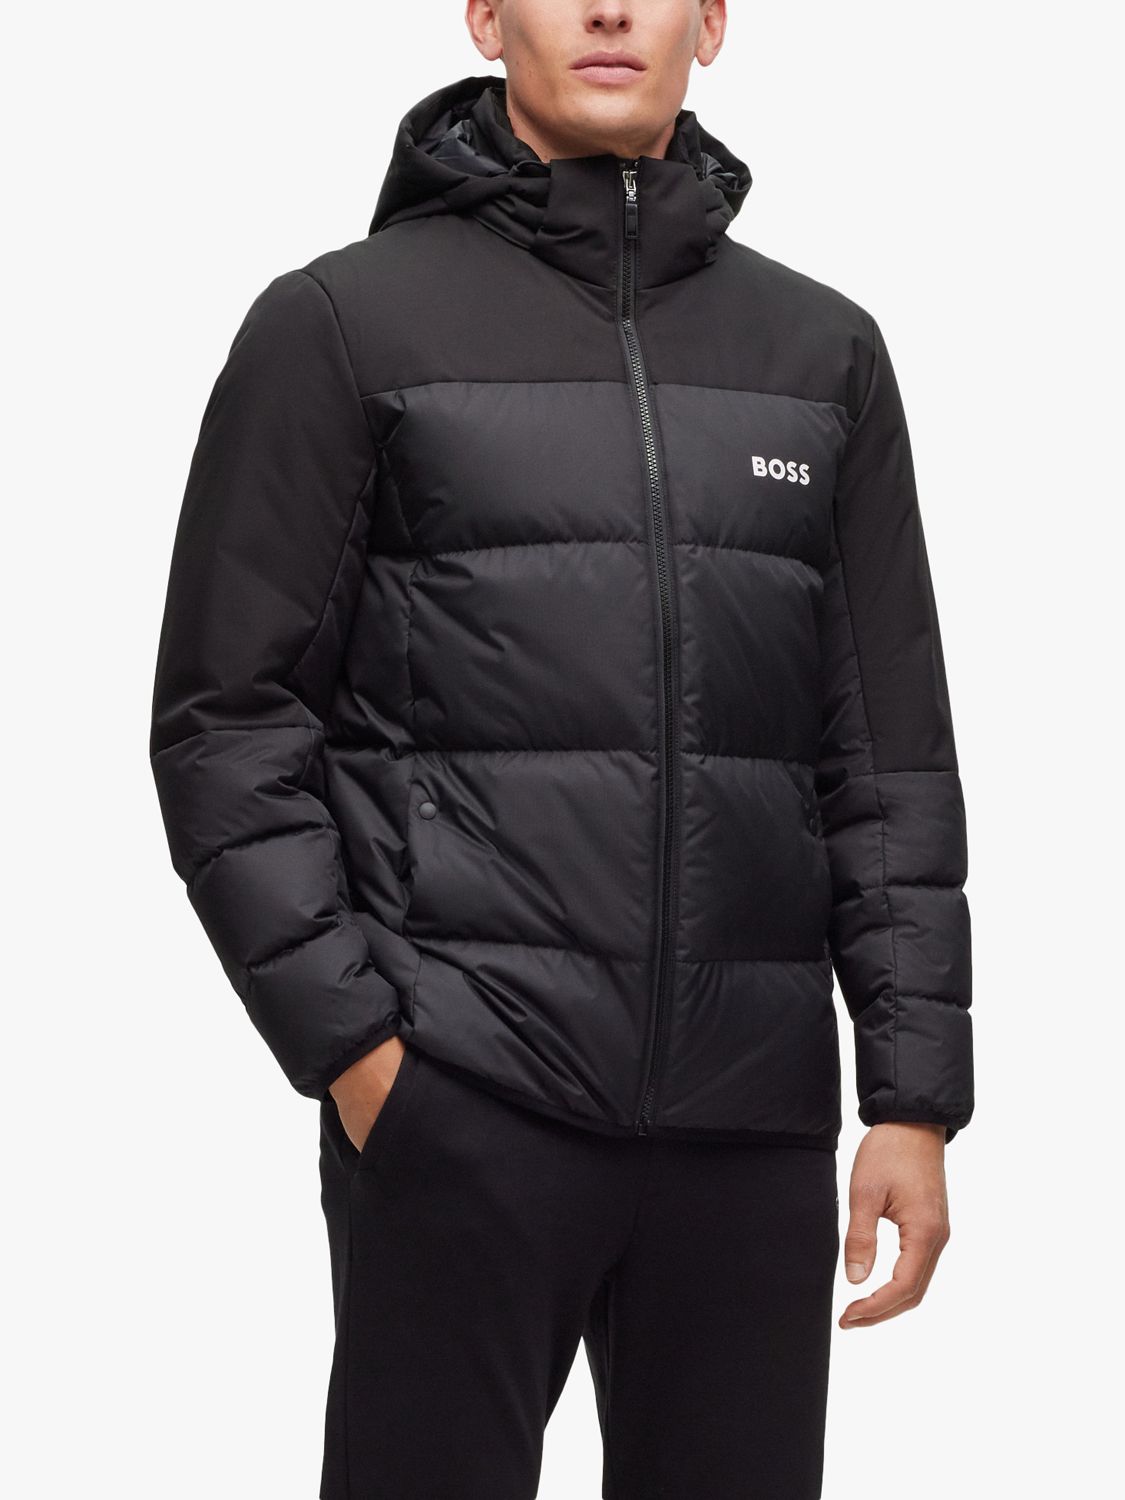 BOSS Hamar Quilted Hooded Jacket, Black at John Lewis & Partners